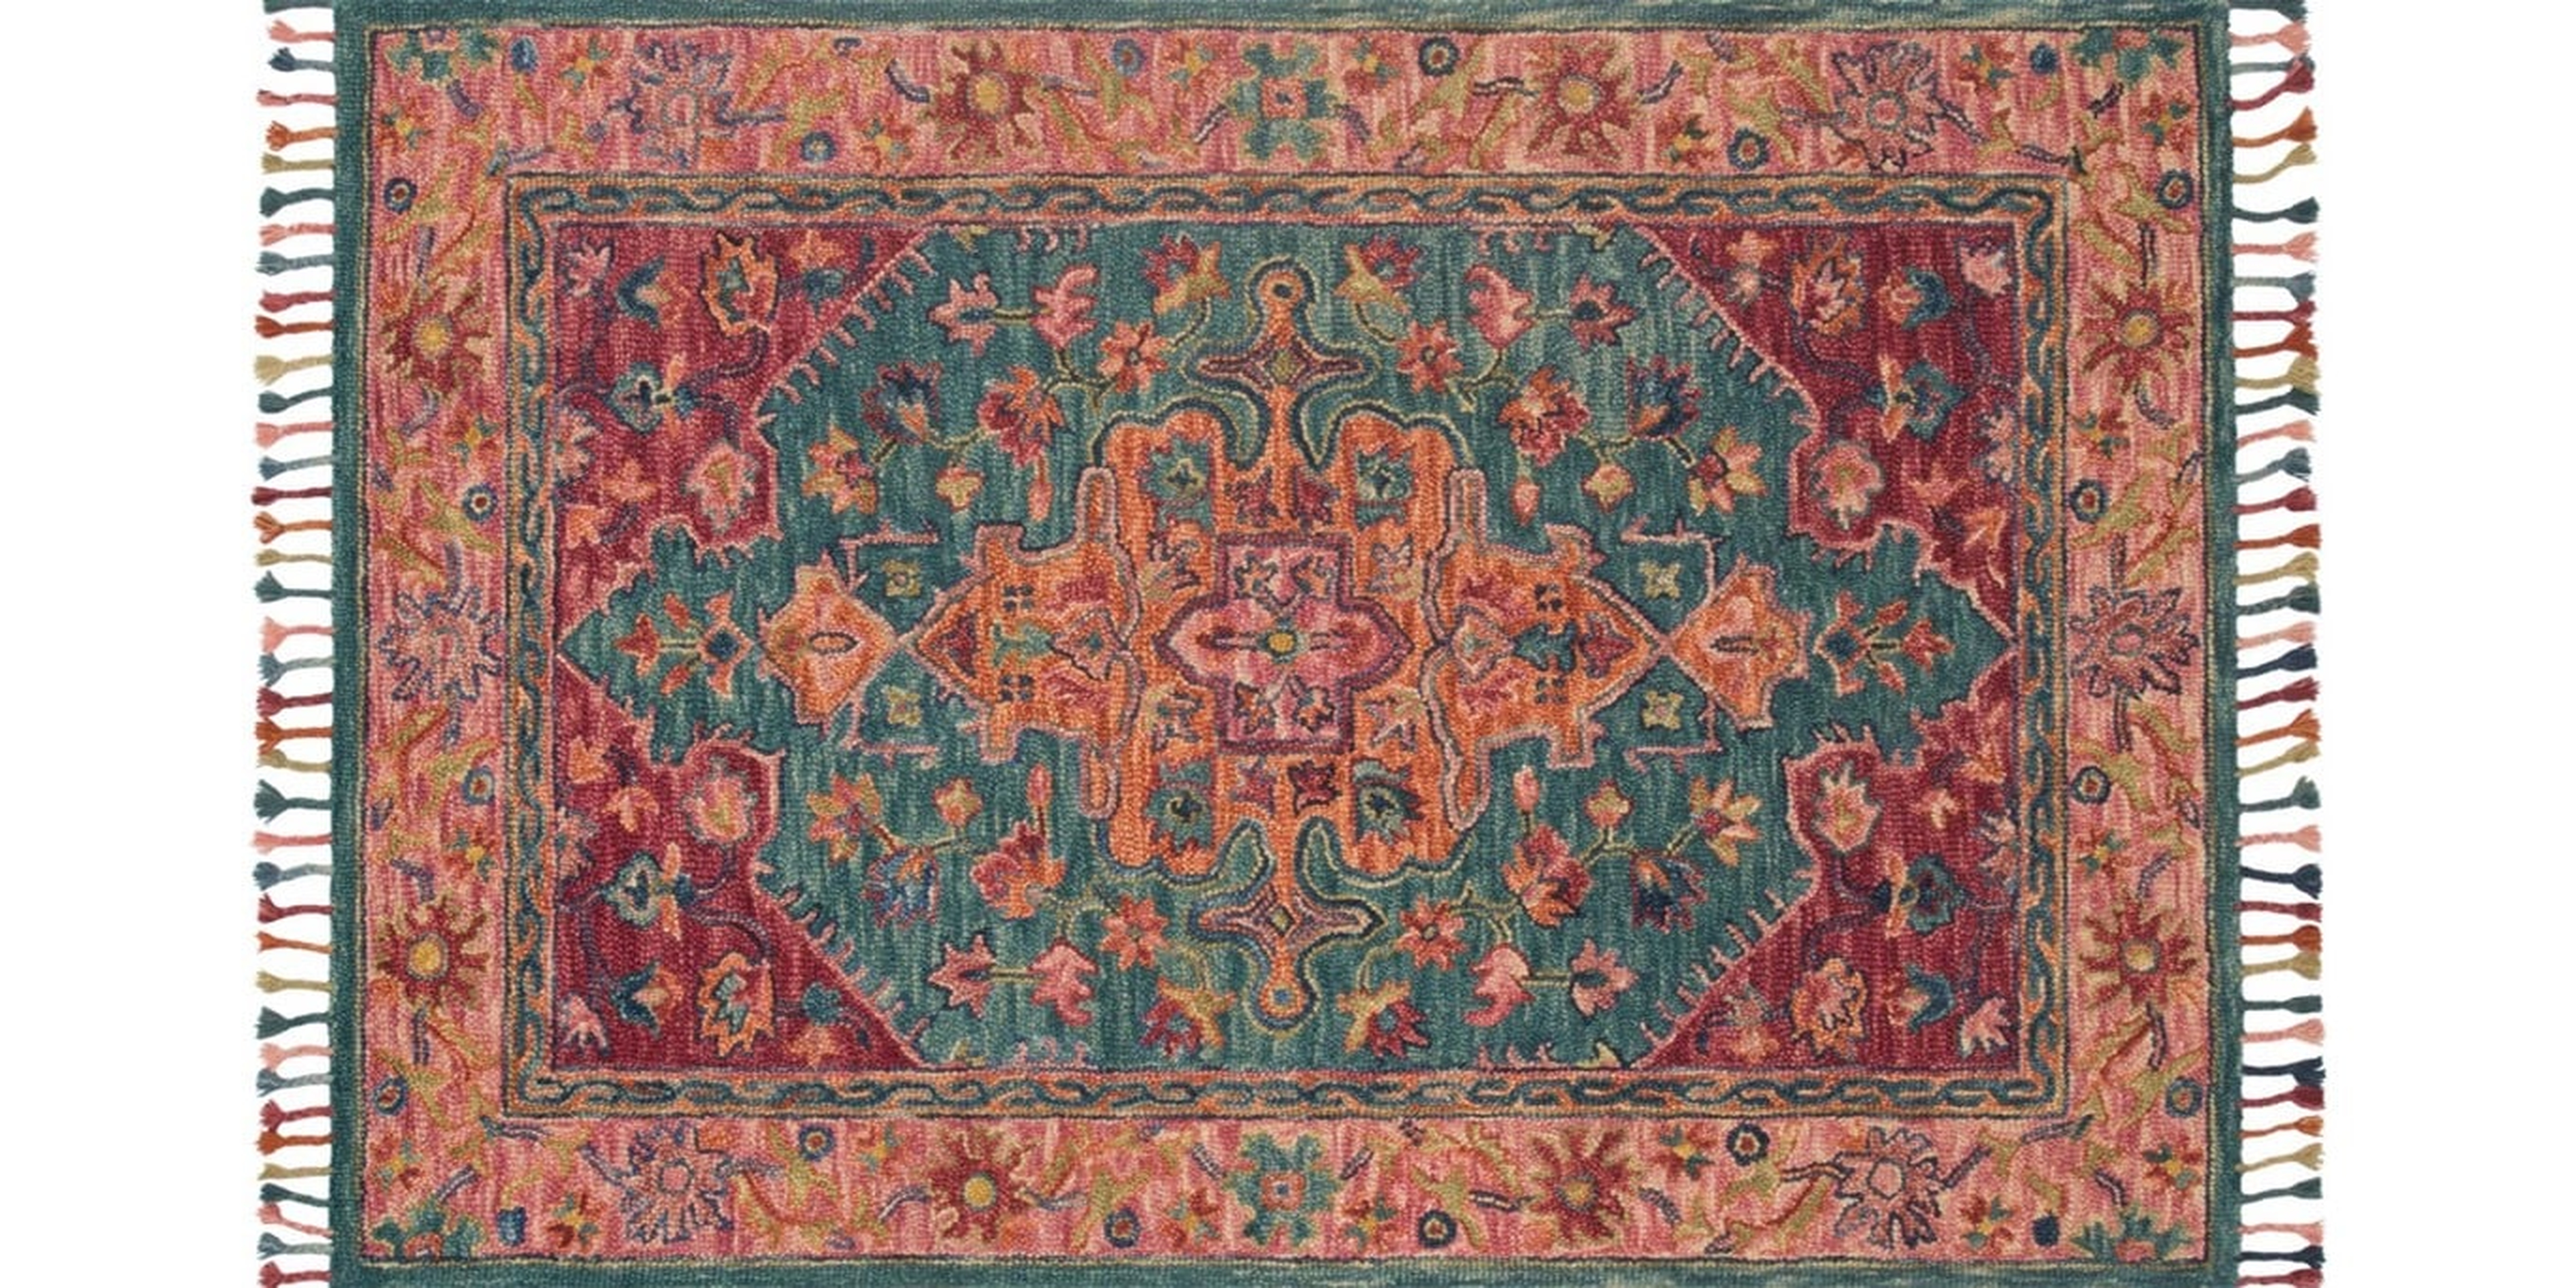 ZR-05 TEAL / BERRY - 5' x 7'6" - Loloi Rugs